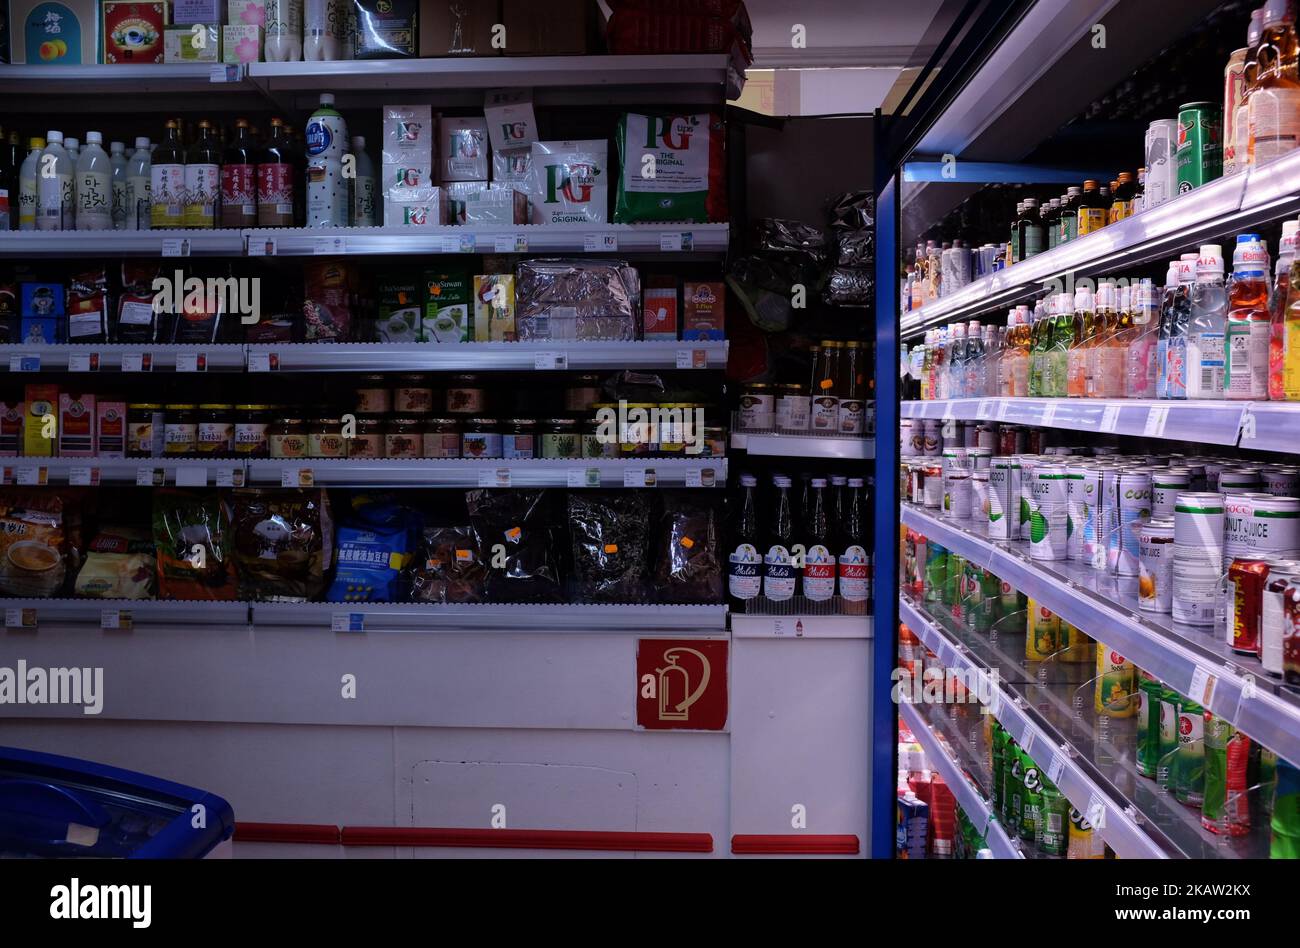 Corner of an European Asian supermarket, with colorful beverages and cooking products Stock Photo